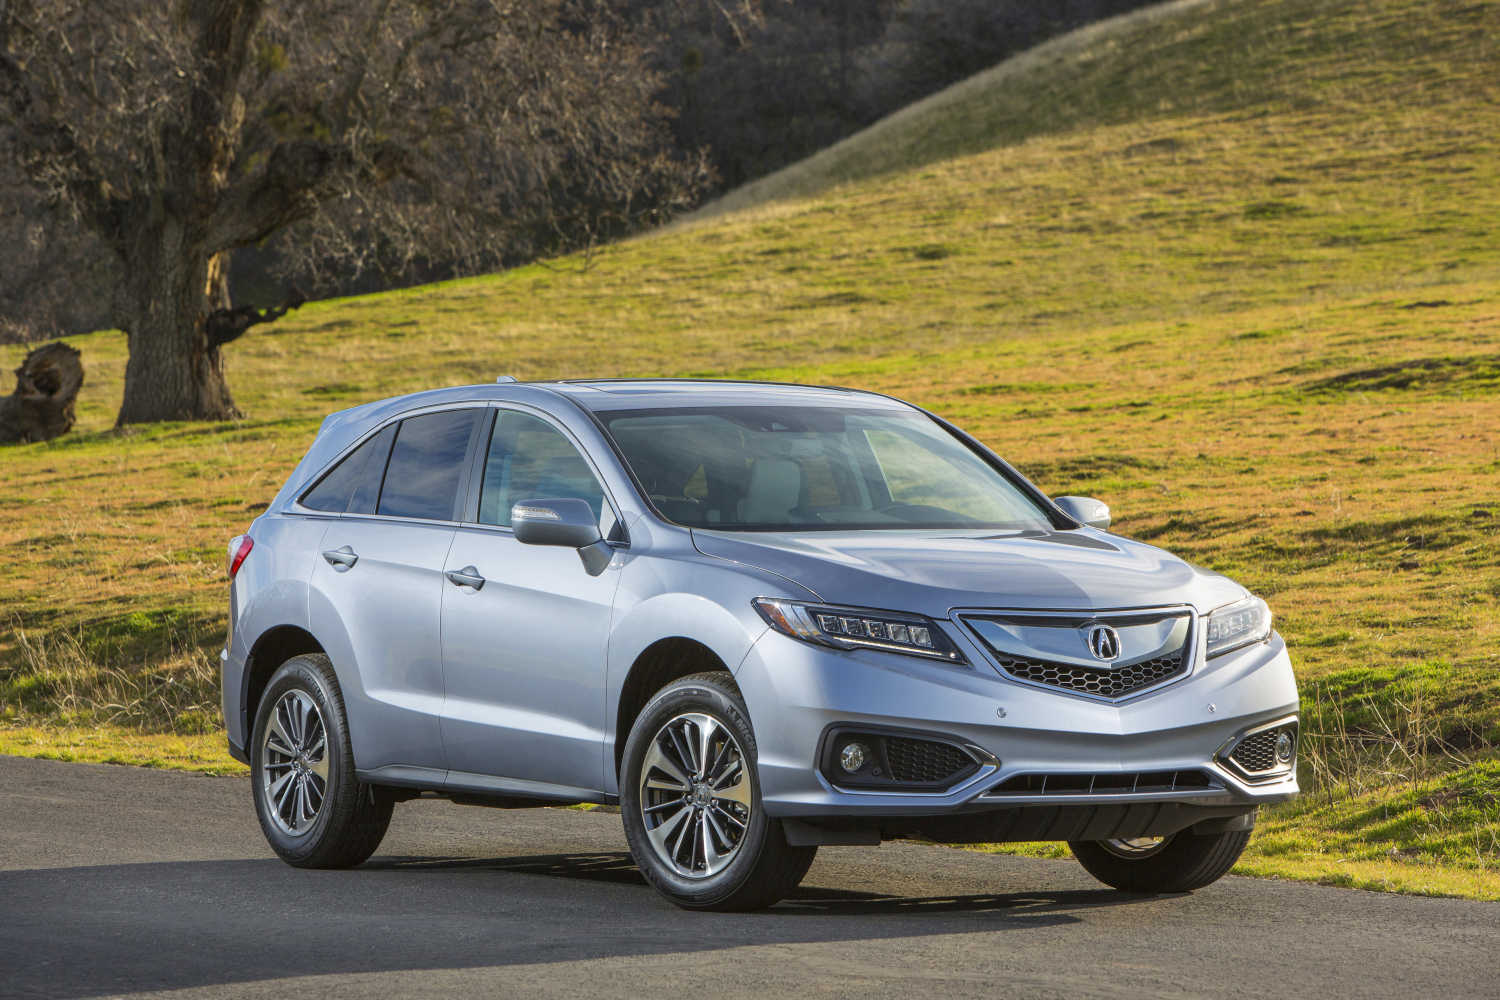 The best used SUVs for teens include this 2016 Acura RDX